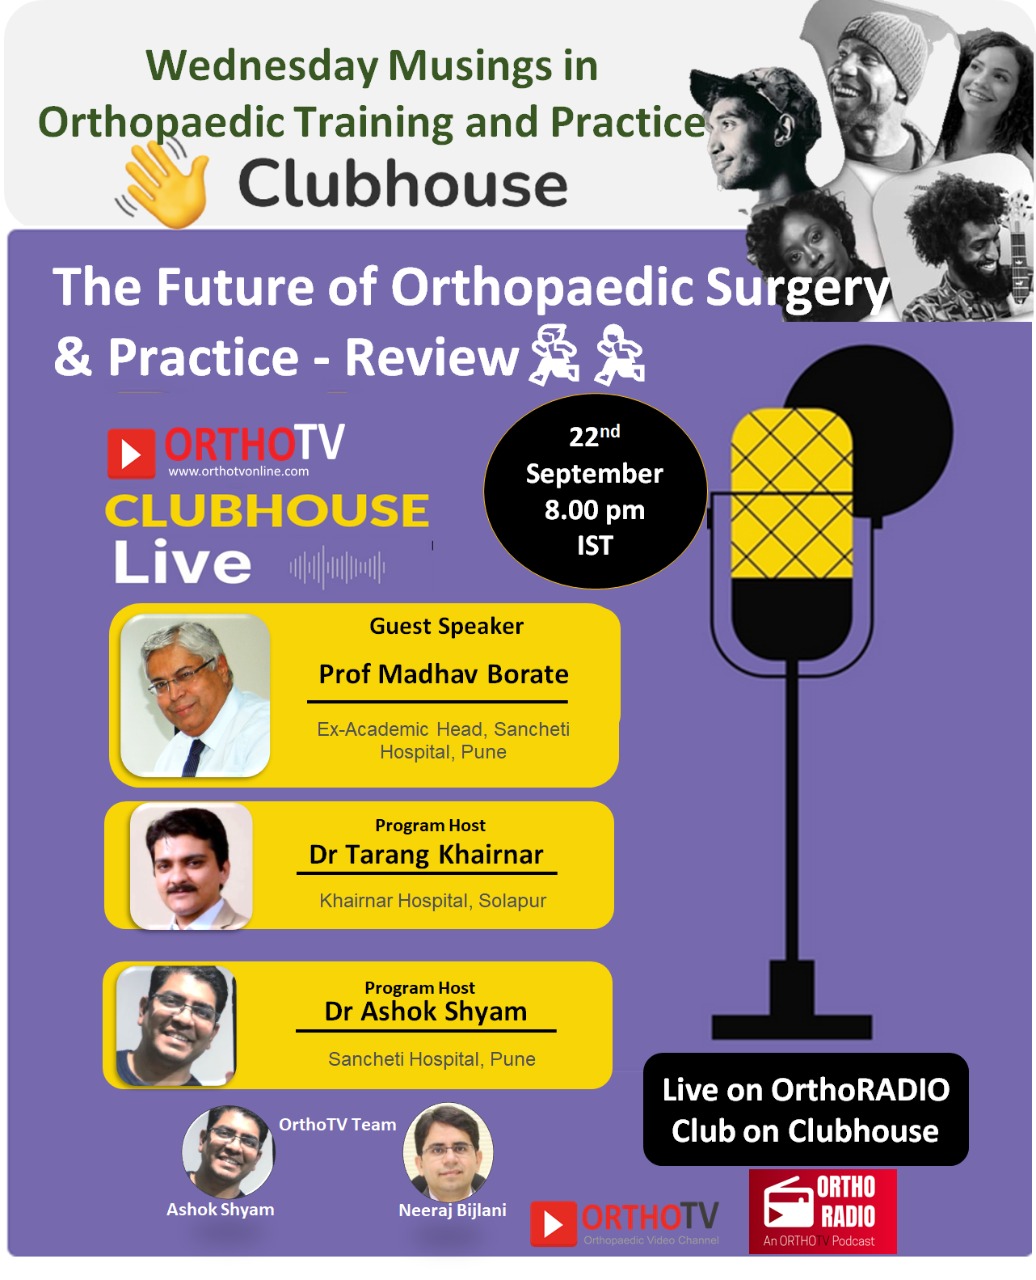 The Future of Orthopaedic Surgery & Practice - Review with Dr Madhav Borate